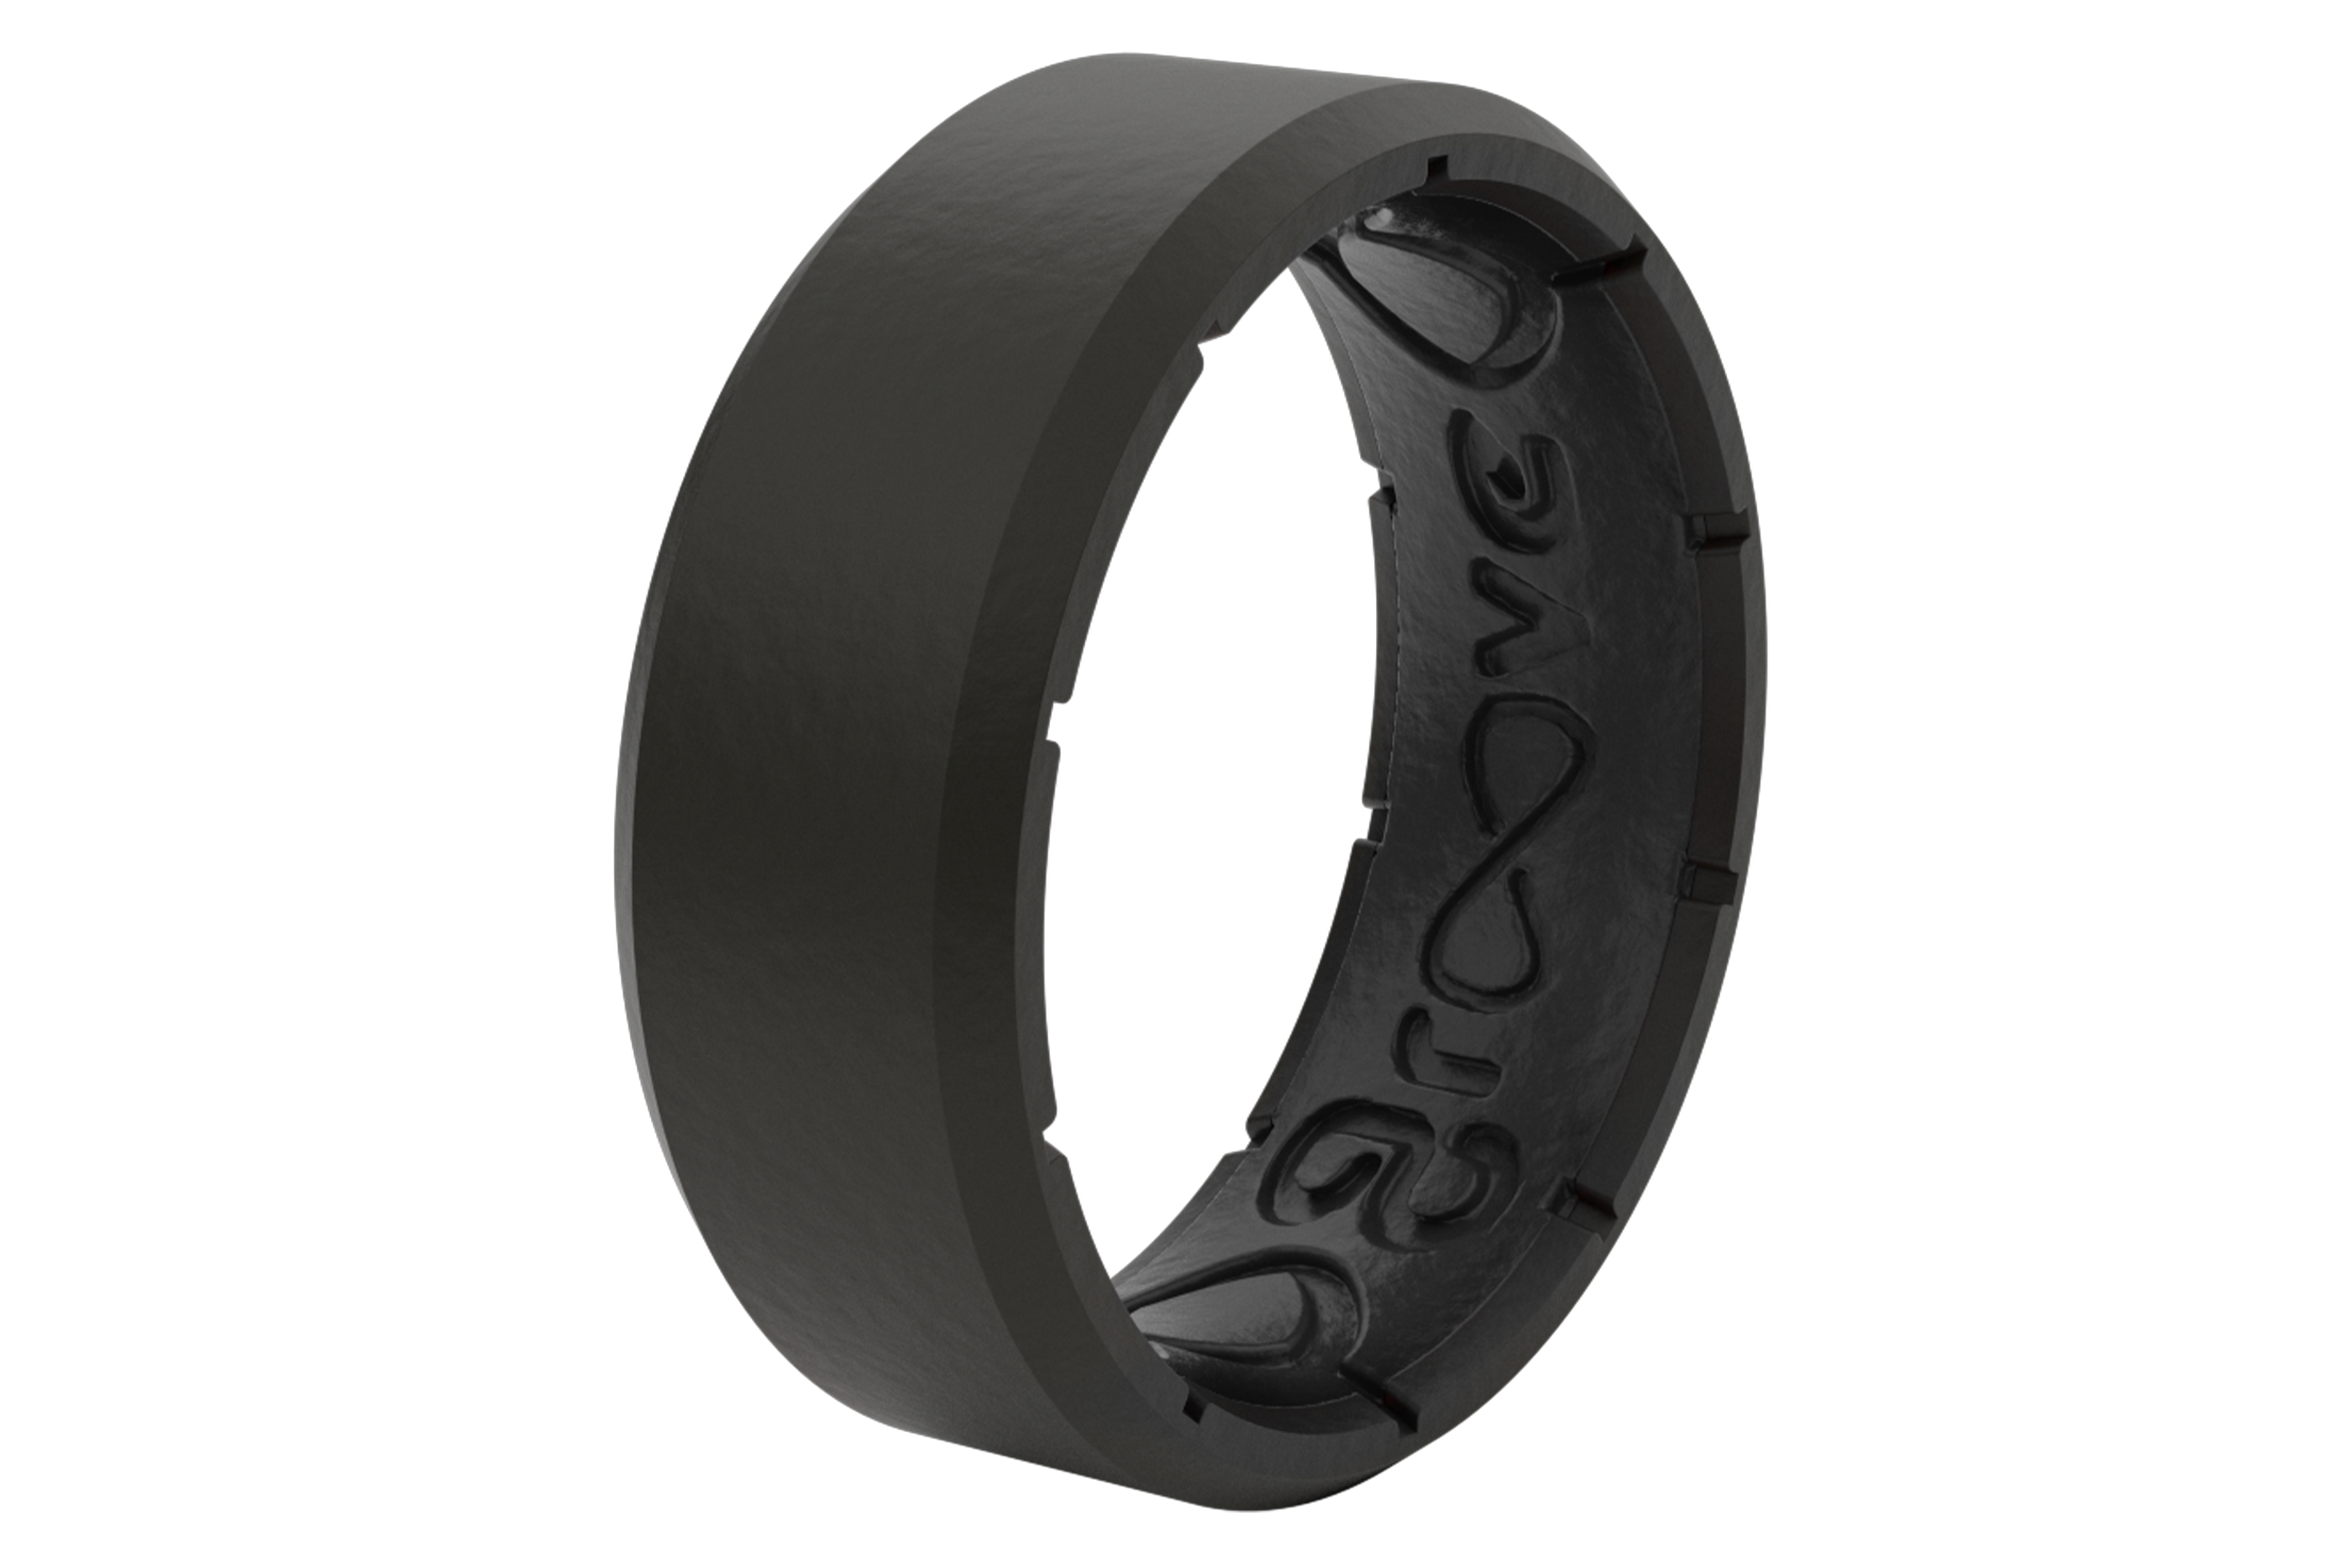 Groove Life Zeus Hammered Gun Metal Silicone Ring, Size 11